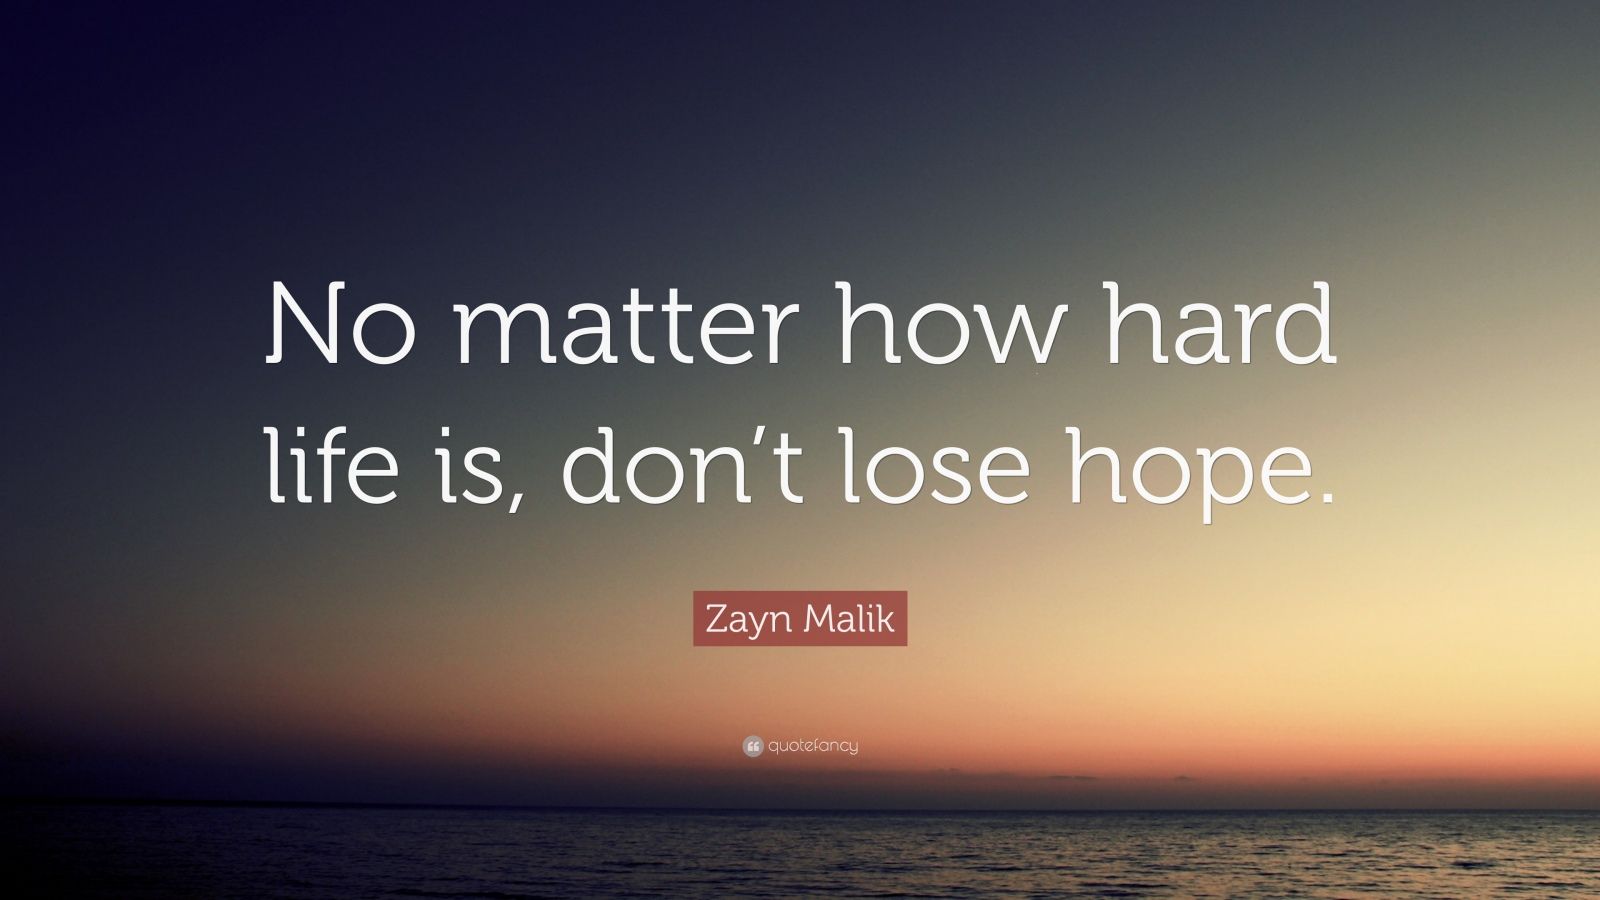 Zayn Malik Quote: “No matter how hard life is, don’t lose hope.” (12